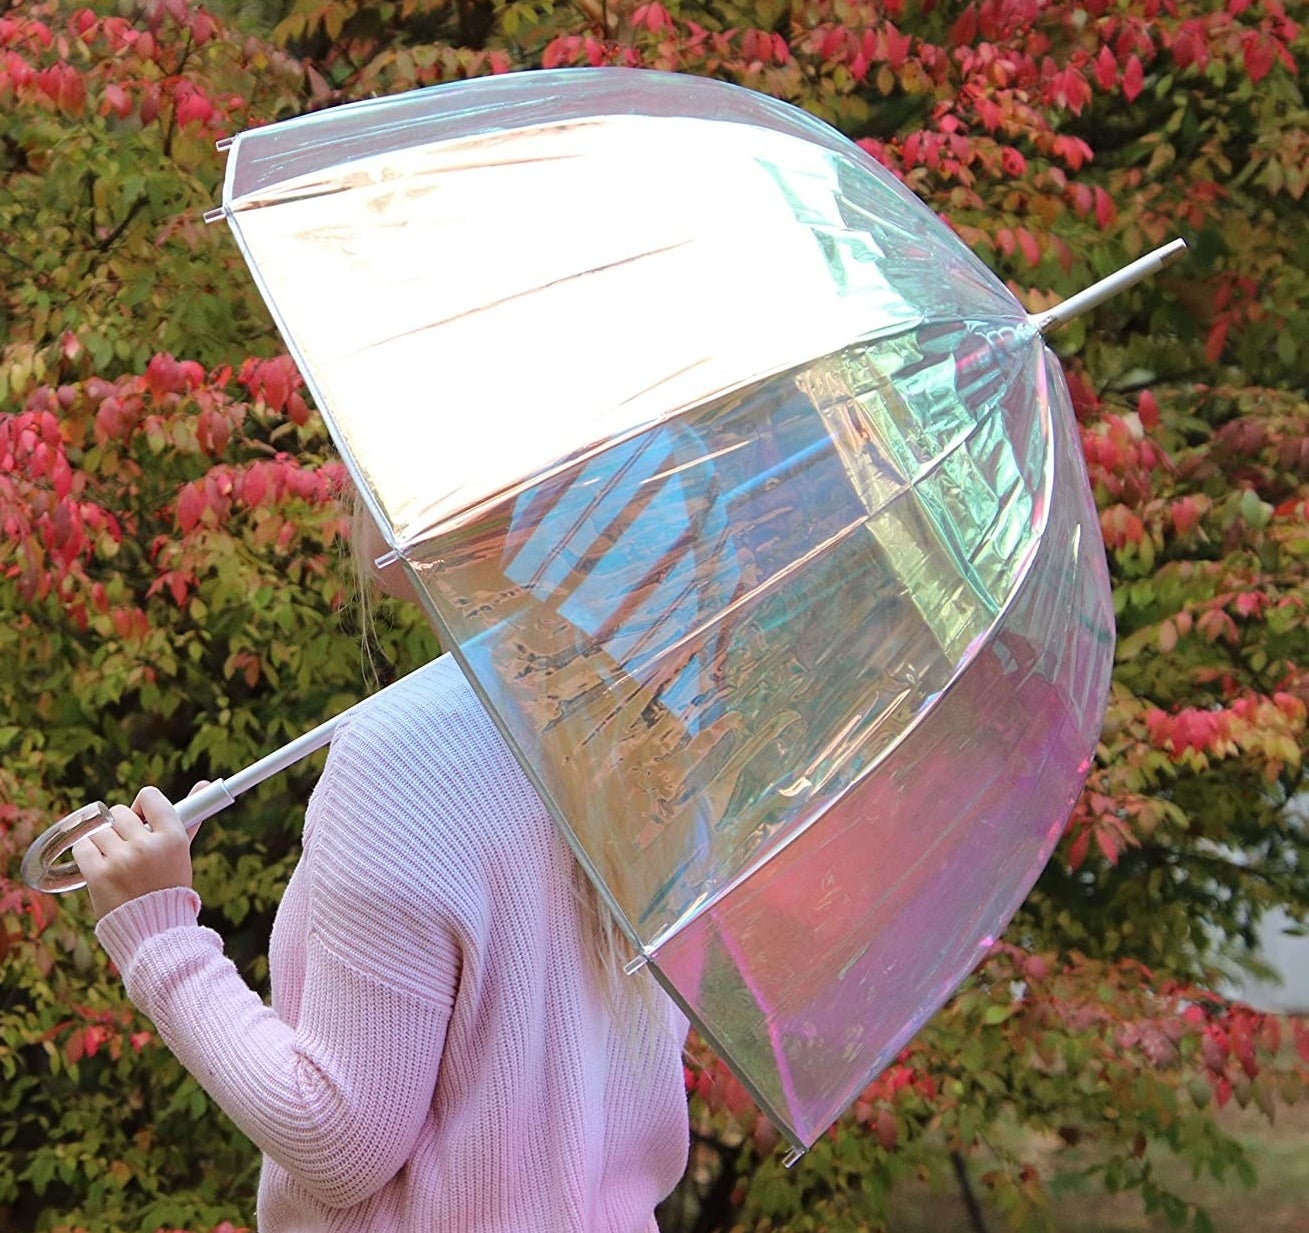 A person holding the holographic bubble umbrella outdoors 